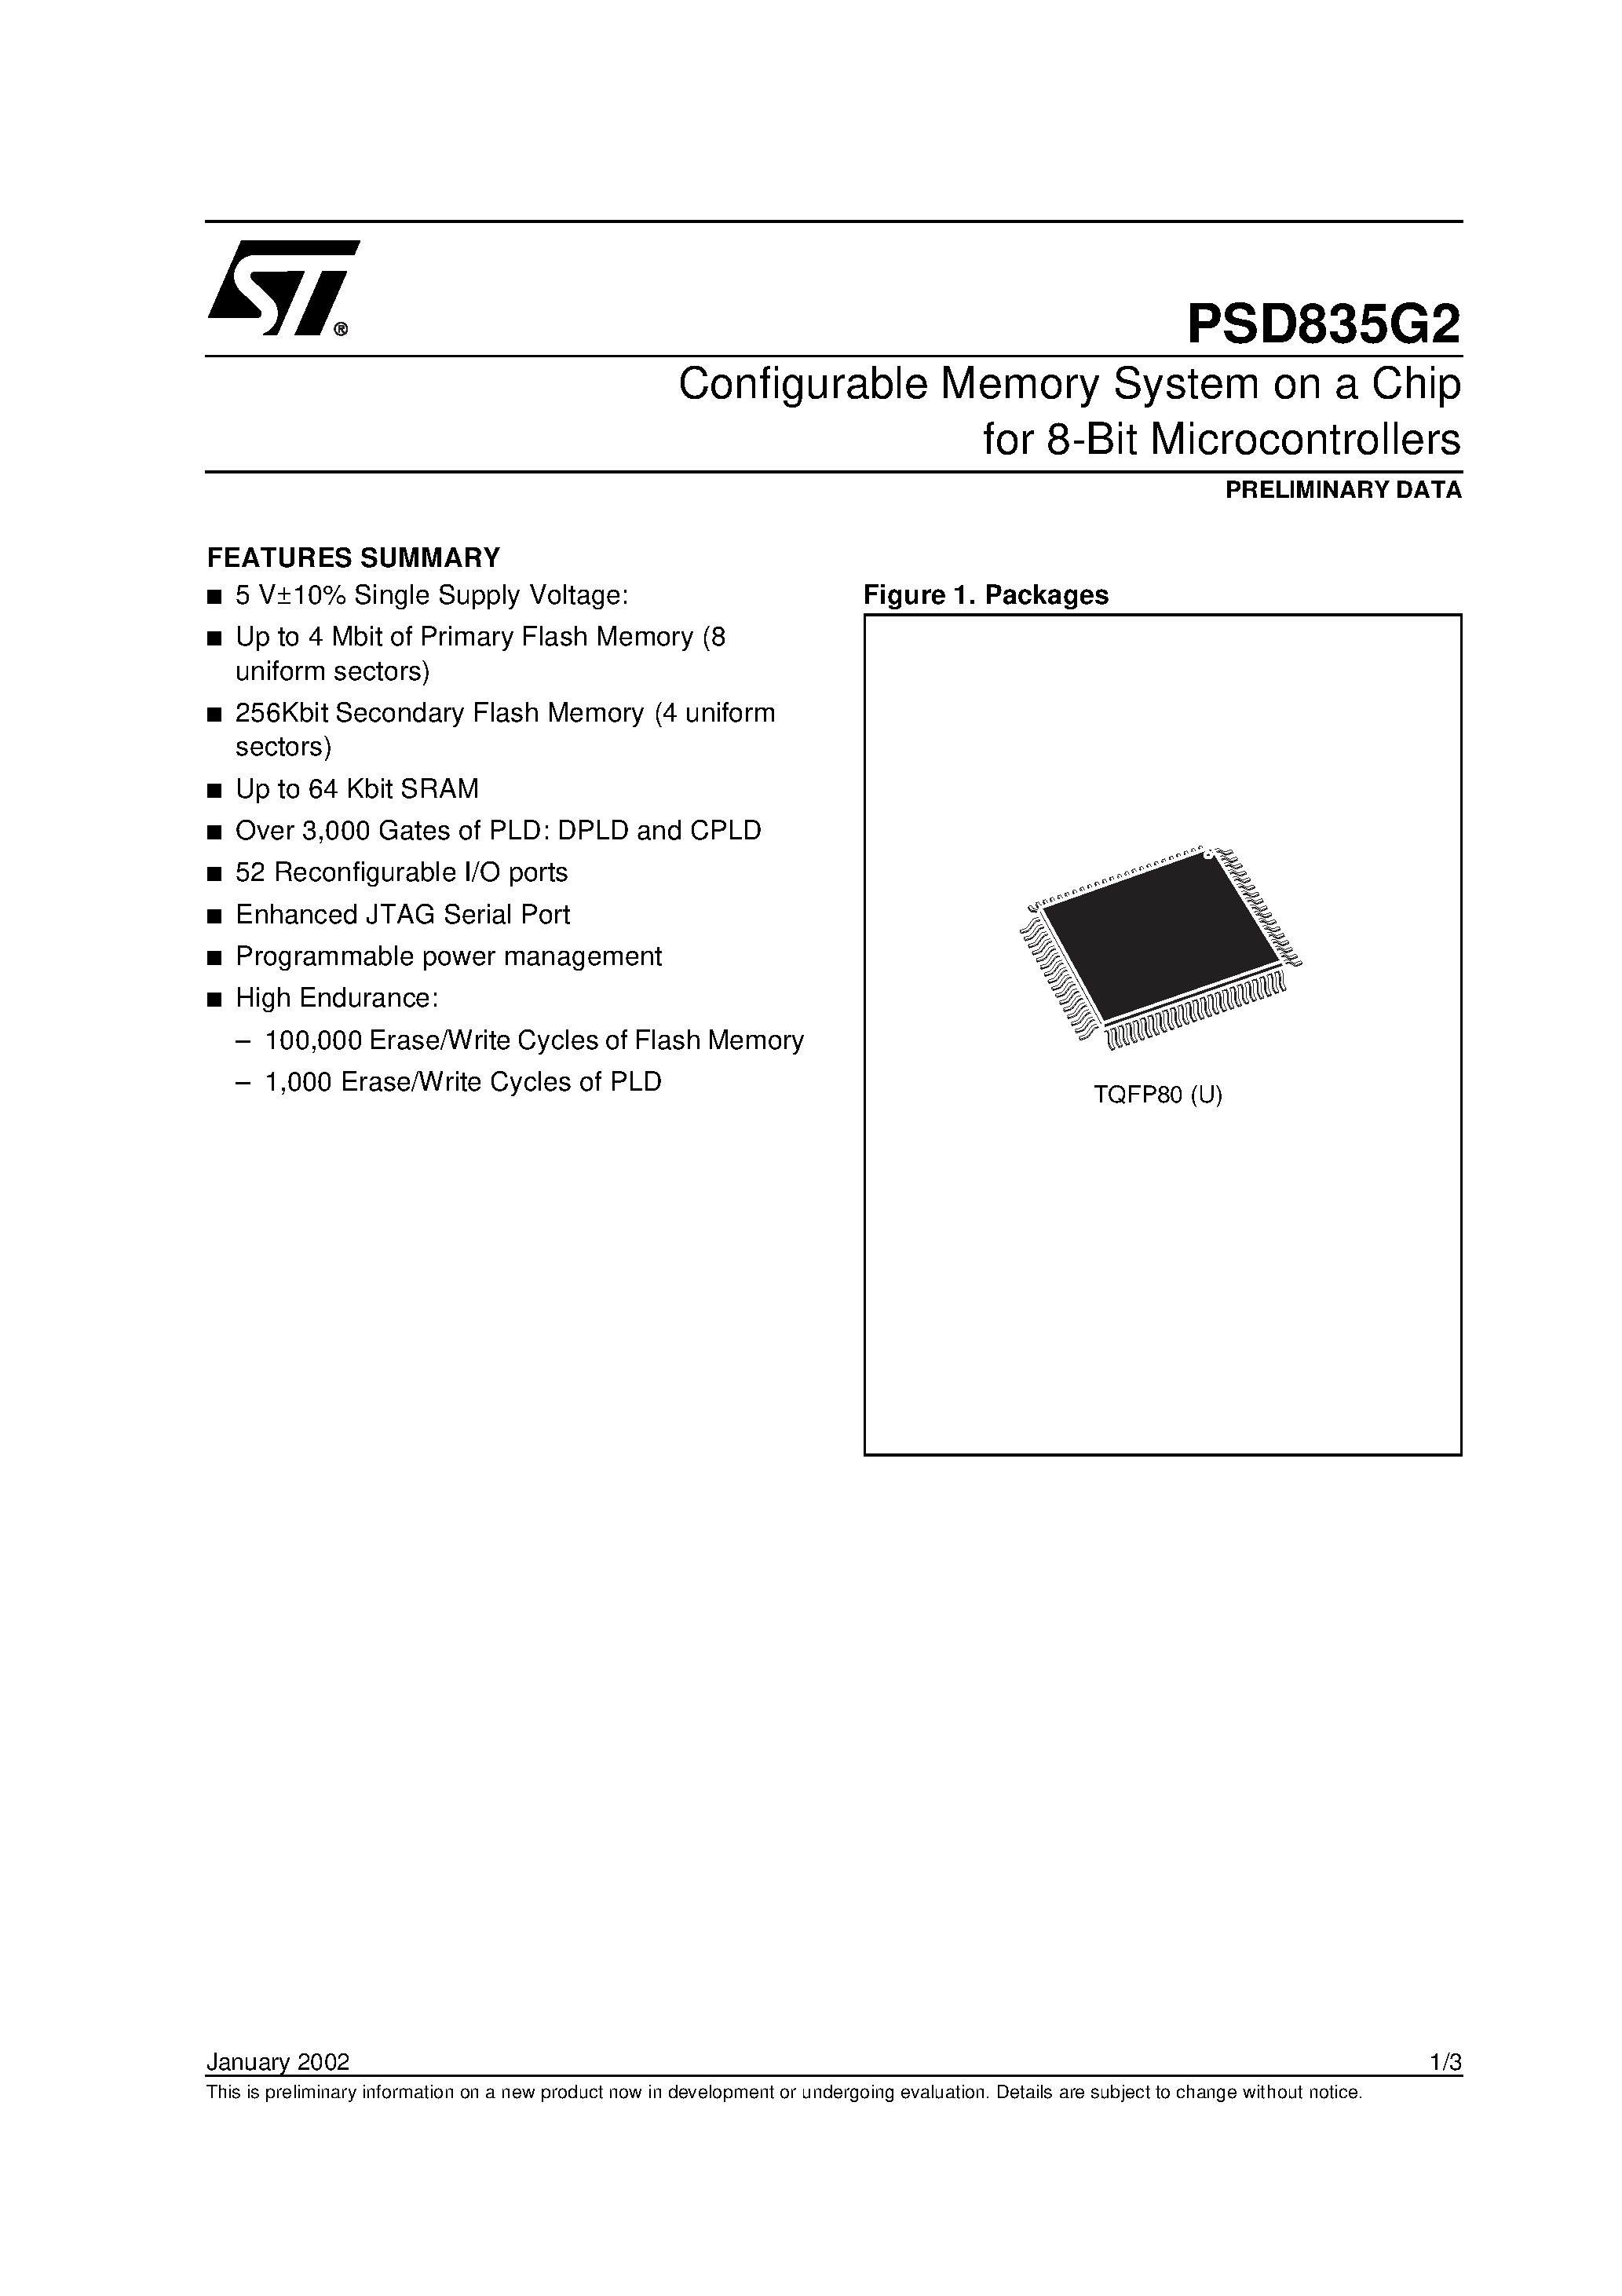 Datasheet PSD835F2V-A-12JI - Configurable Memory System on a Chip for 8-Bit Microcontrollers page 1